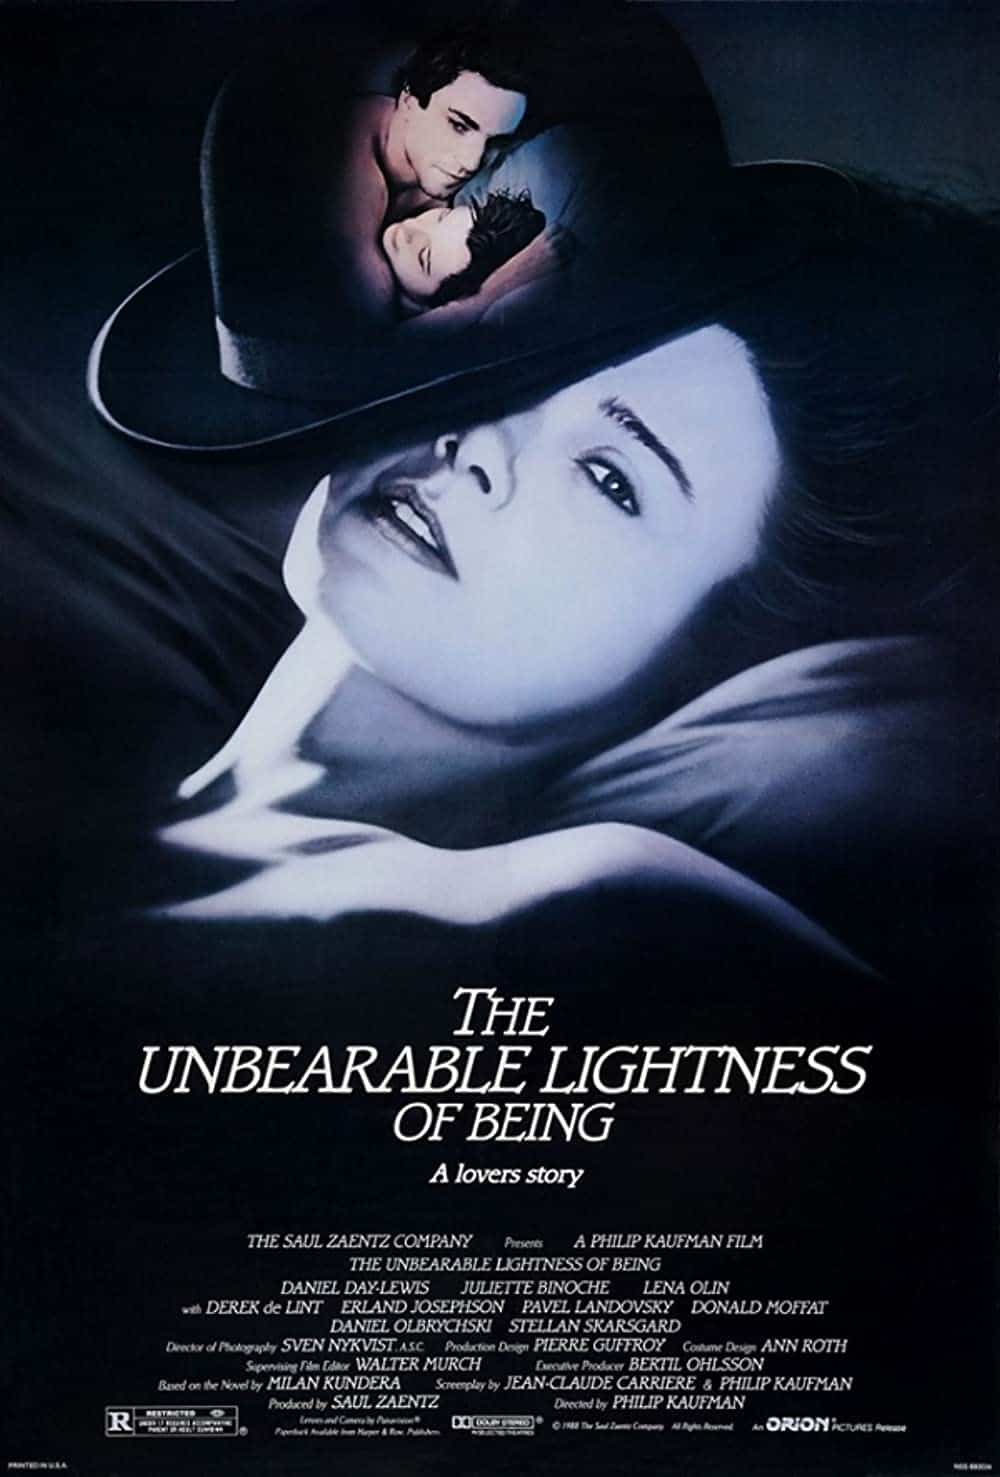 Daniel Day Lewis The Unbearable Lightness of Being (1988)